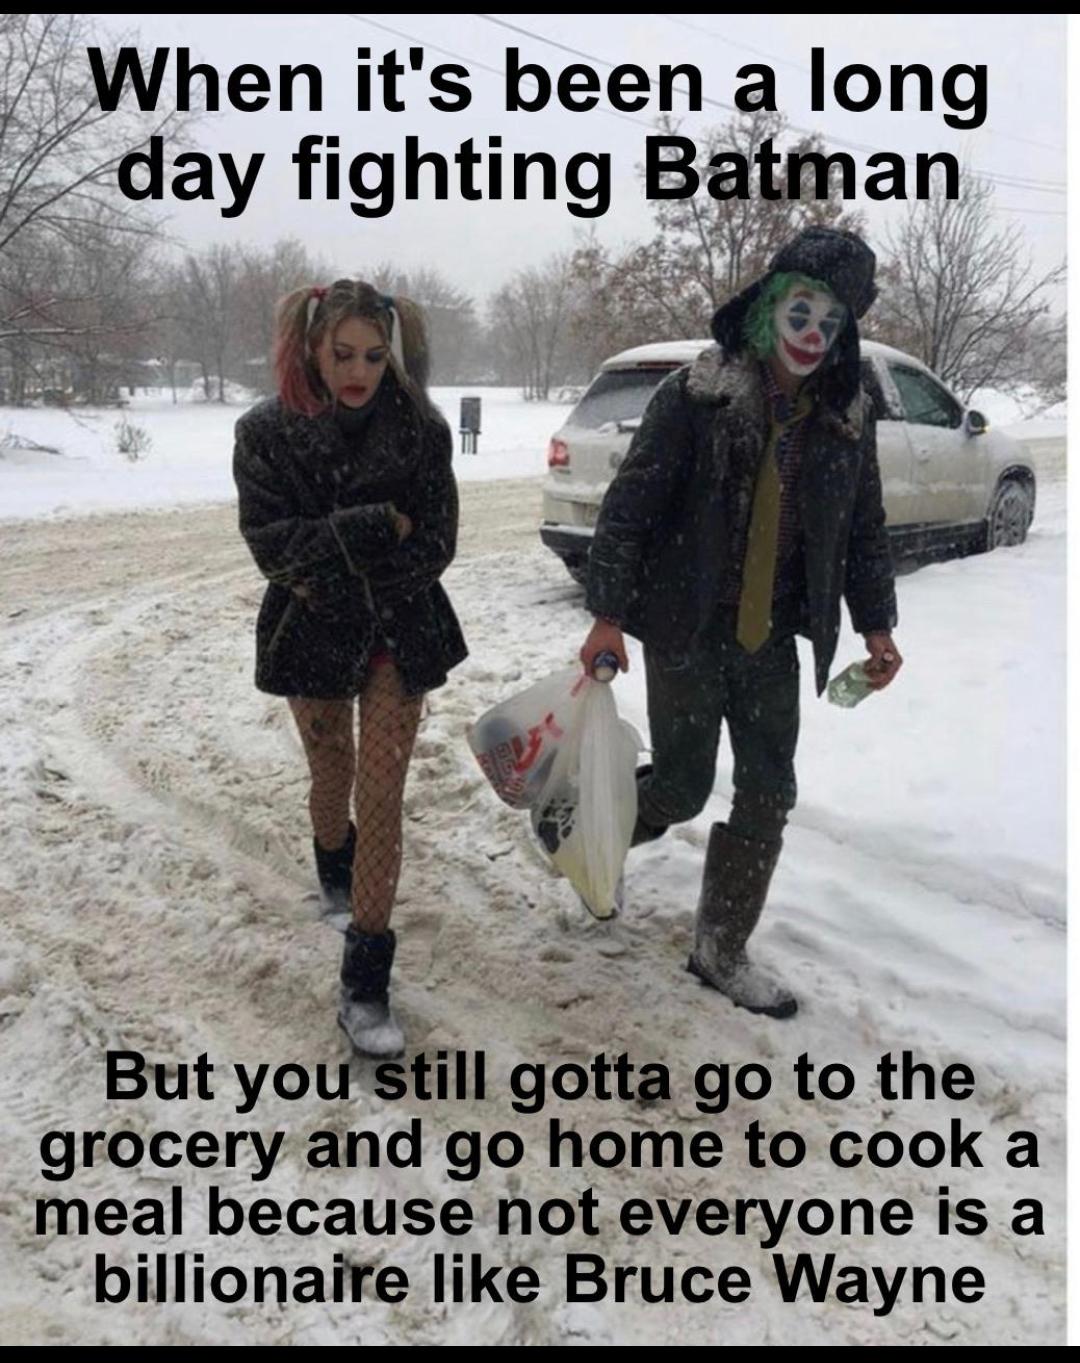 Harley Quinn - When it's been a long day fighting Batman But you still gotta go to the grocery and go home to cook a meal because not everyone is a billionaire Bruce Wayne